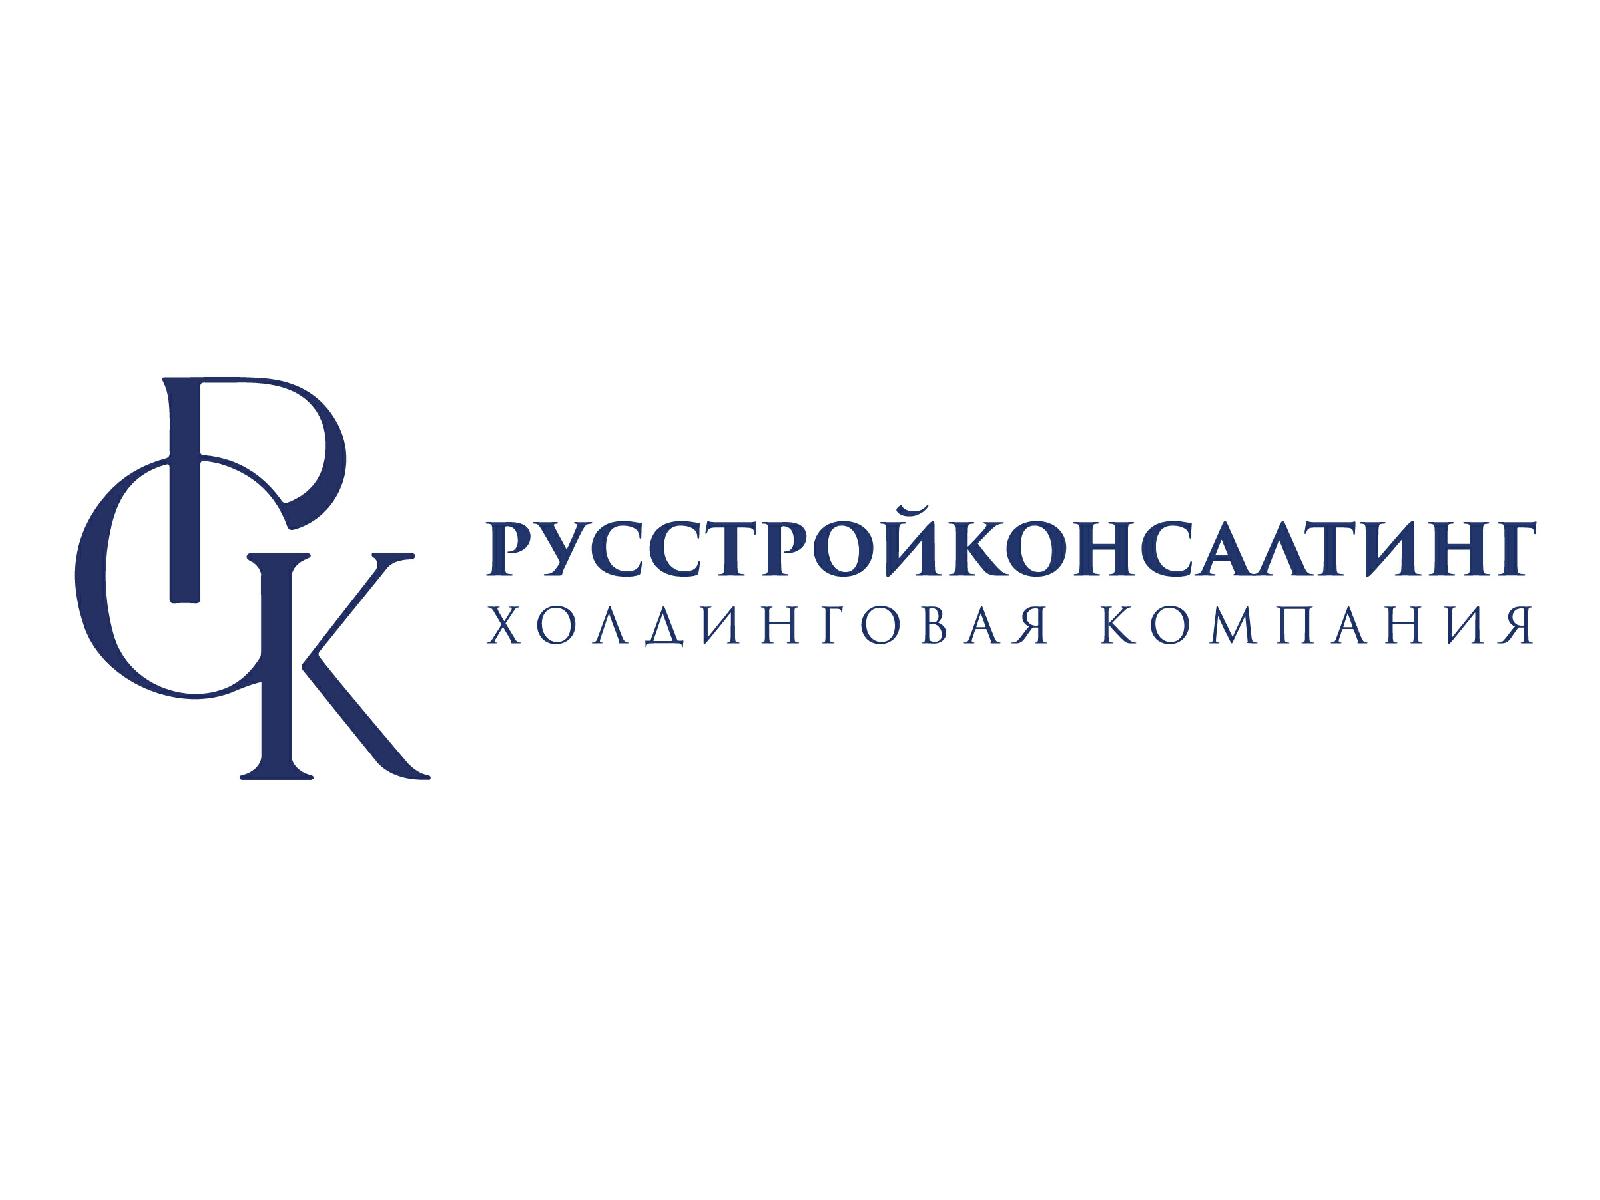 Russtroyconsulting